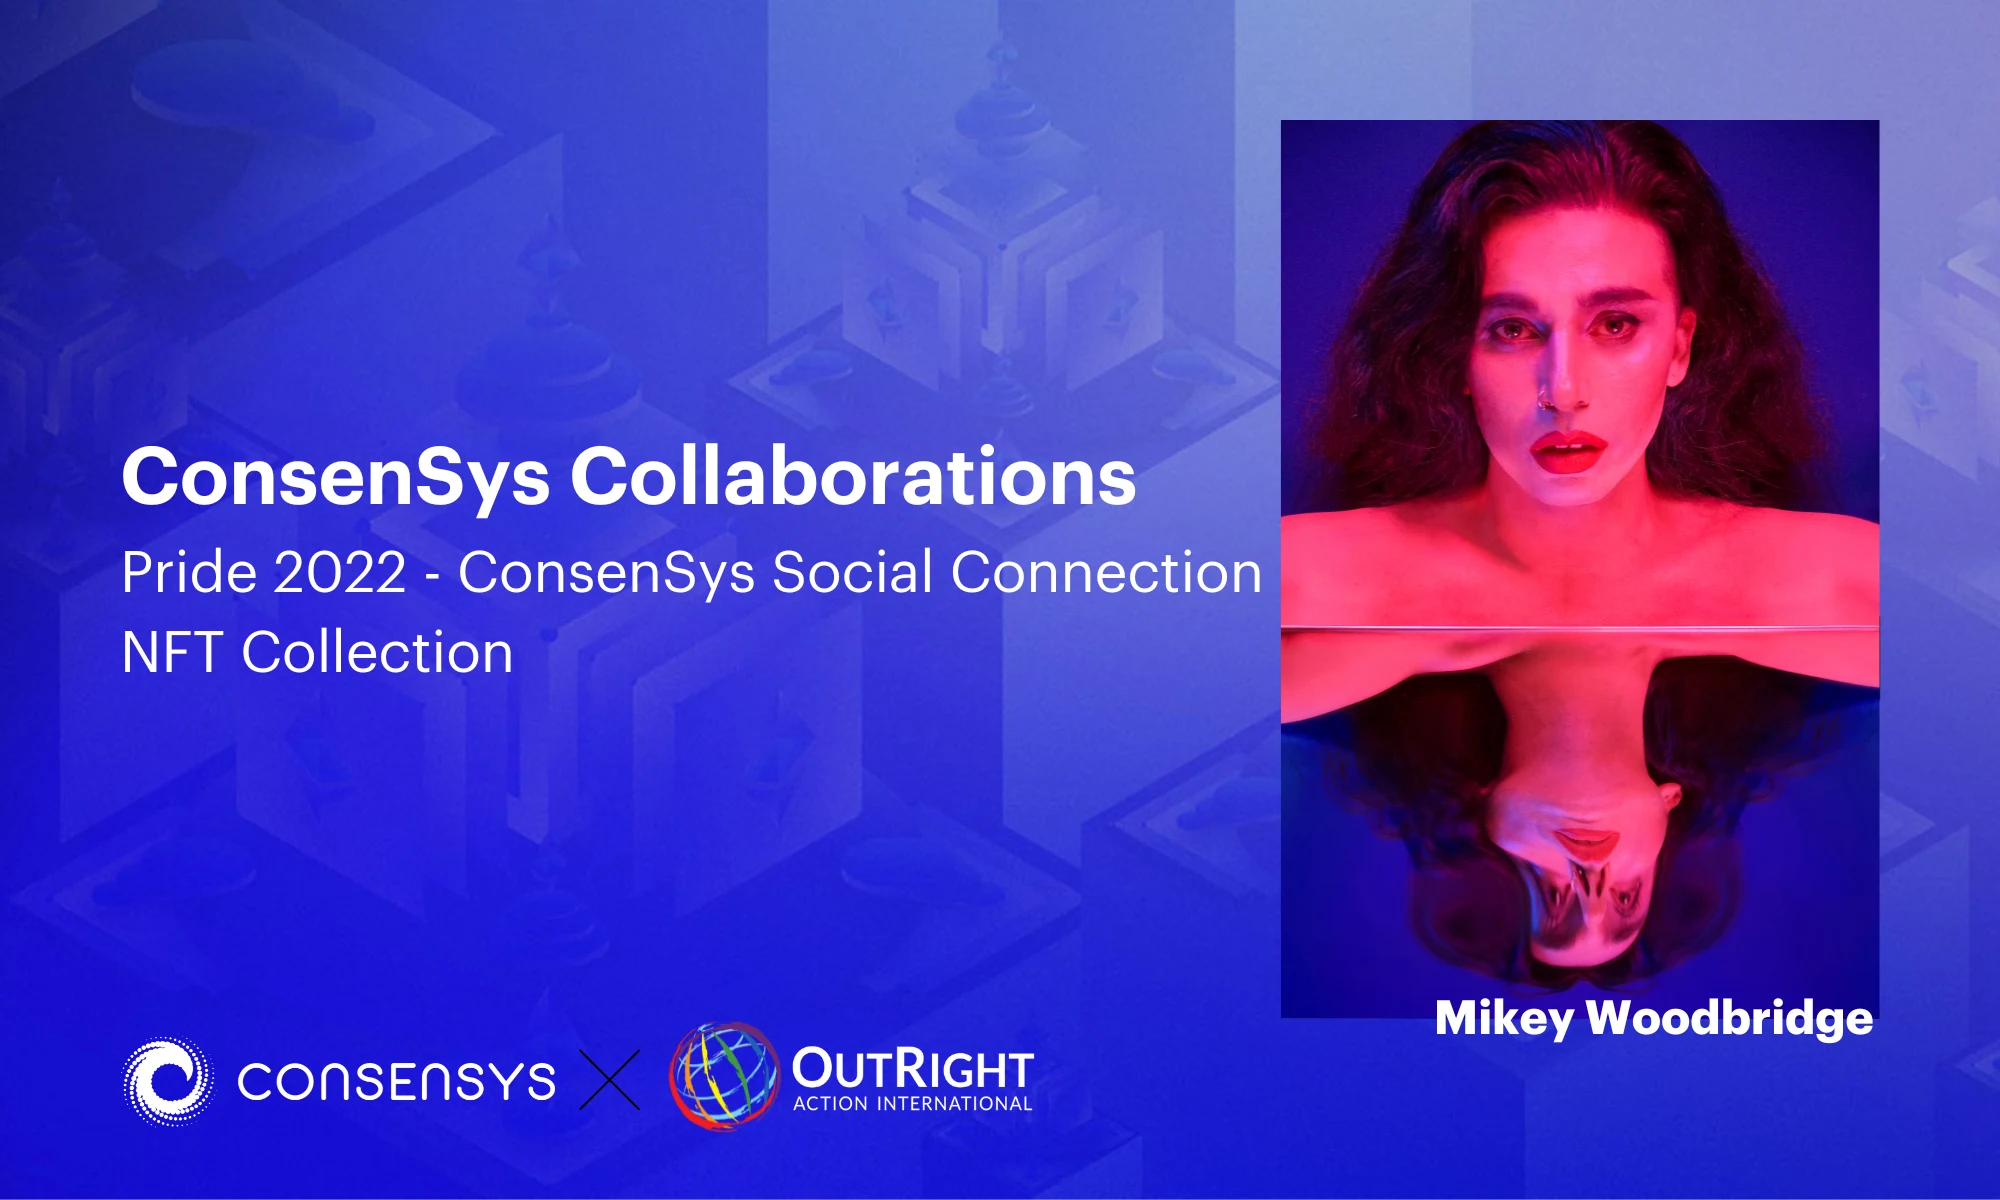 Image: Pride 2022 - ConsenSys Social Connection